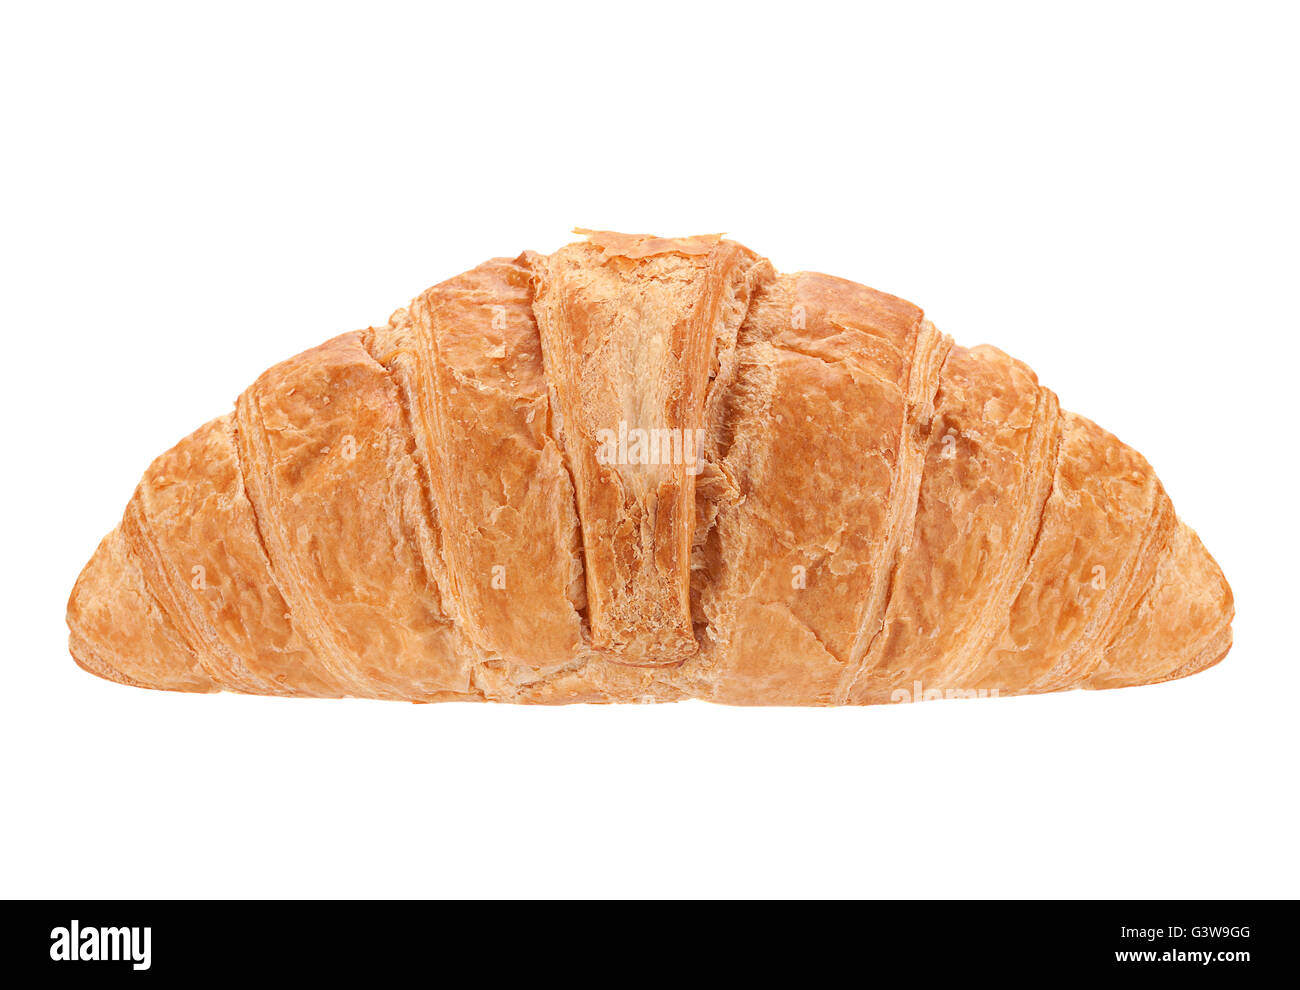 Croissant snack closeup isolated on white background Stock Photo